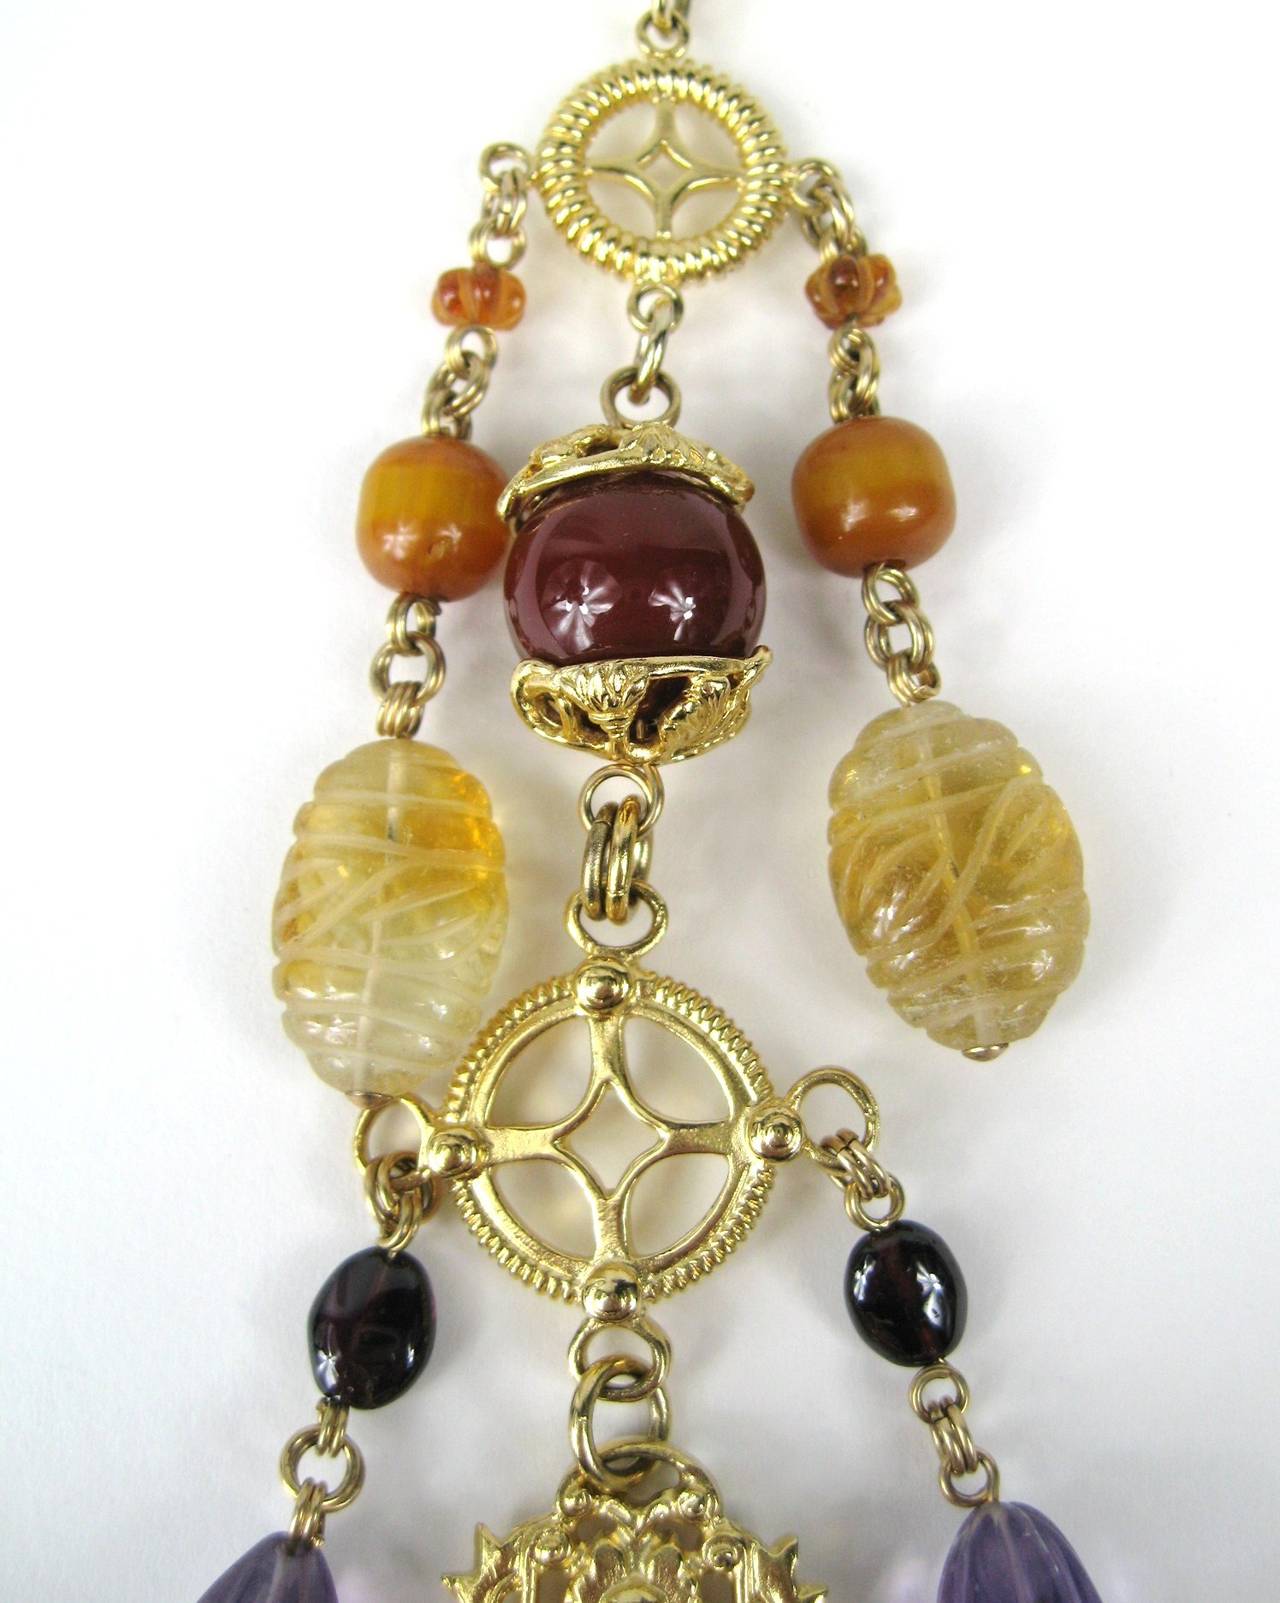 Pictures don't depict how amazing this Stephen Dweck stunning Gold Vermeil over Sterling Silver chain with charms of stones, Amber, Amethyst, Citrine, Garnet, Bloodstone, Horn, Jade and Peridot is! Double link chain Carved Stone - 34-inch long chain